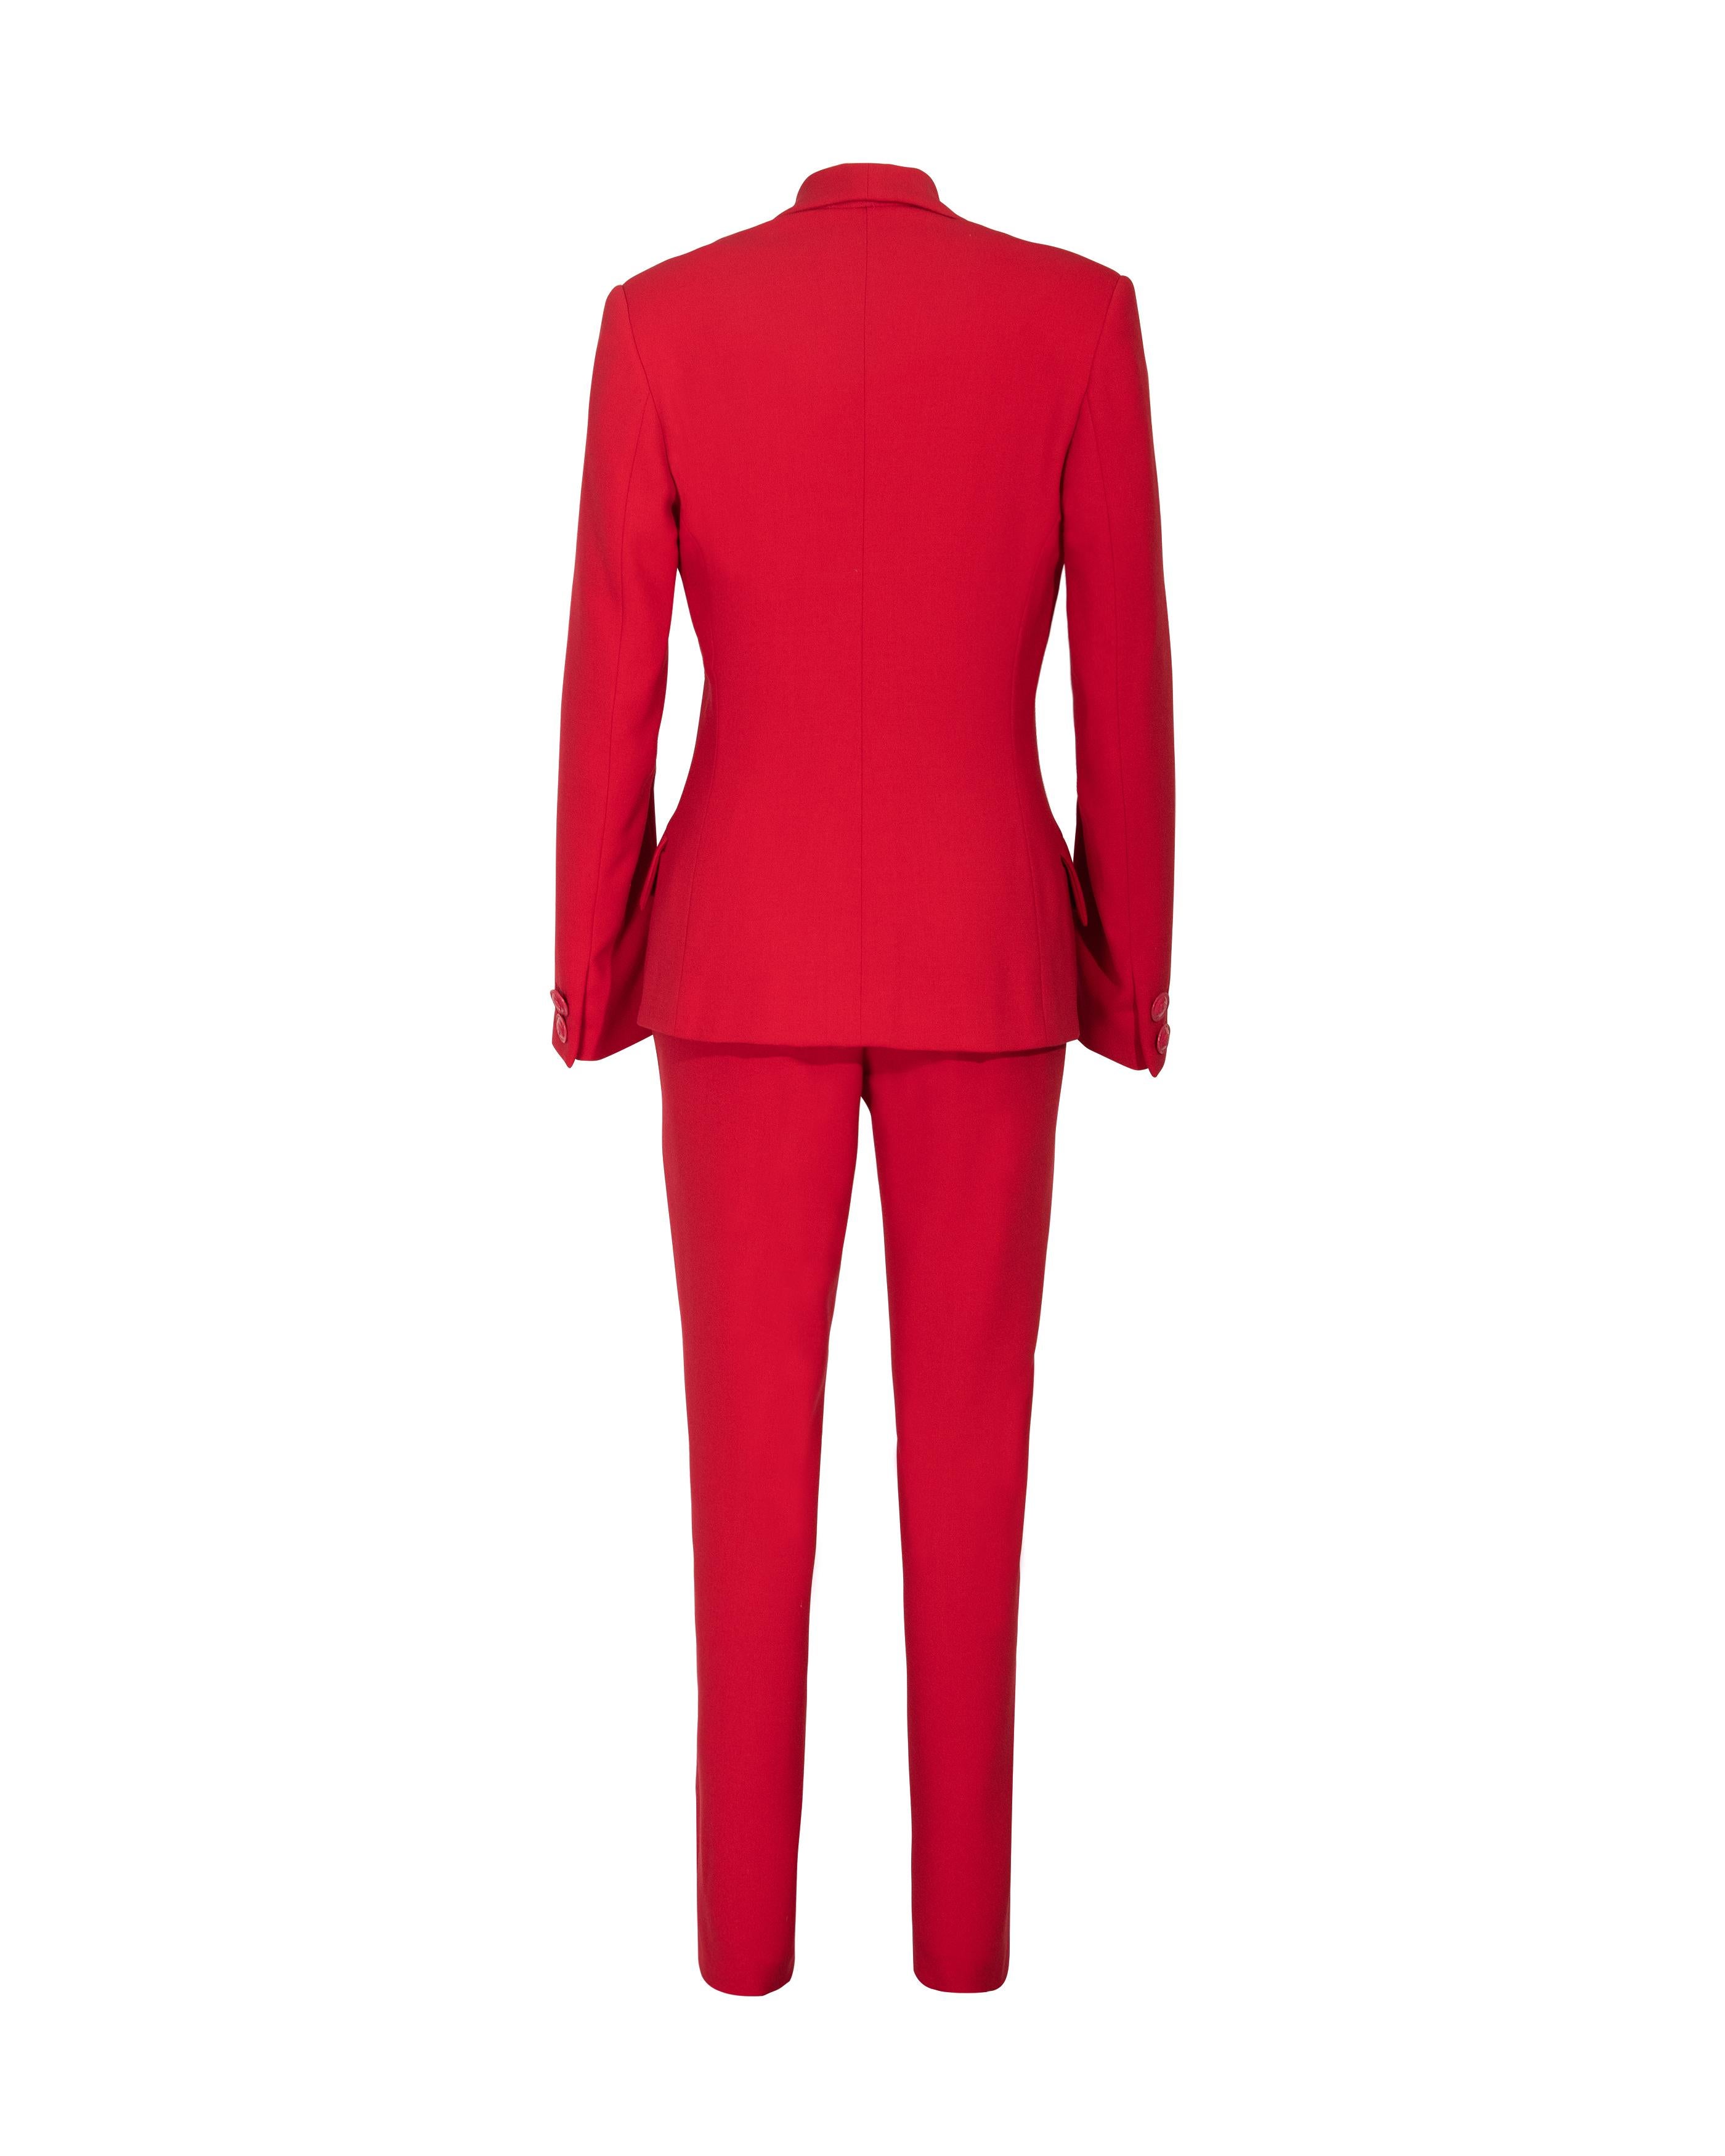 Women's A/W 1995 Gianni Versace Red Suit Set